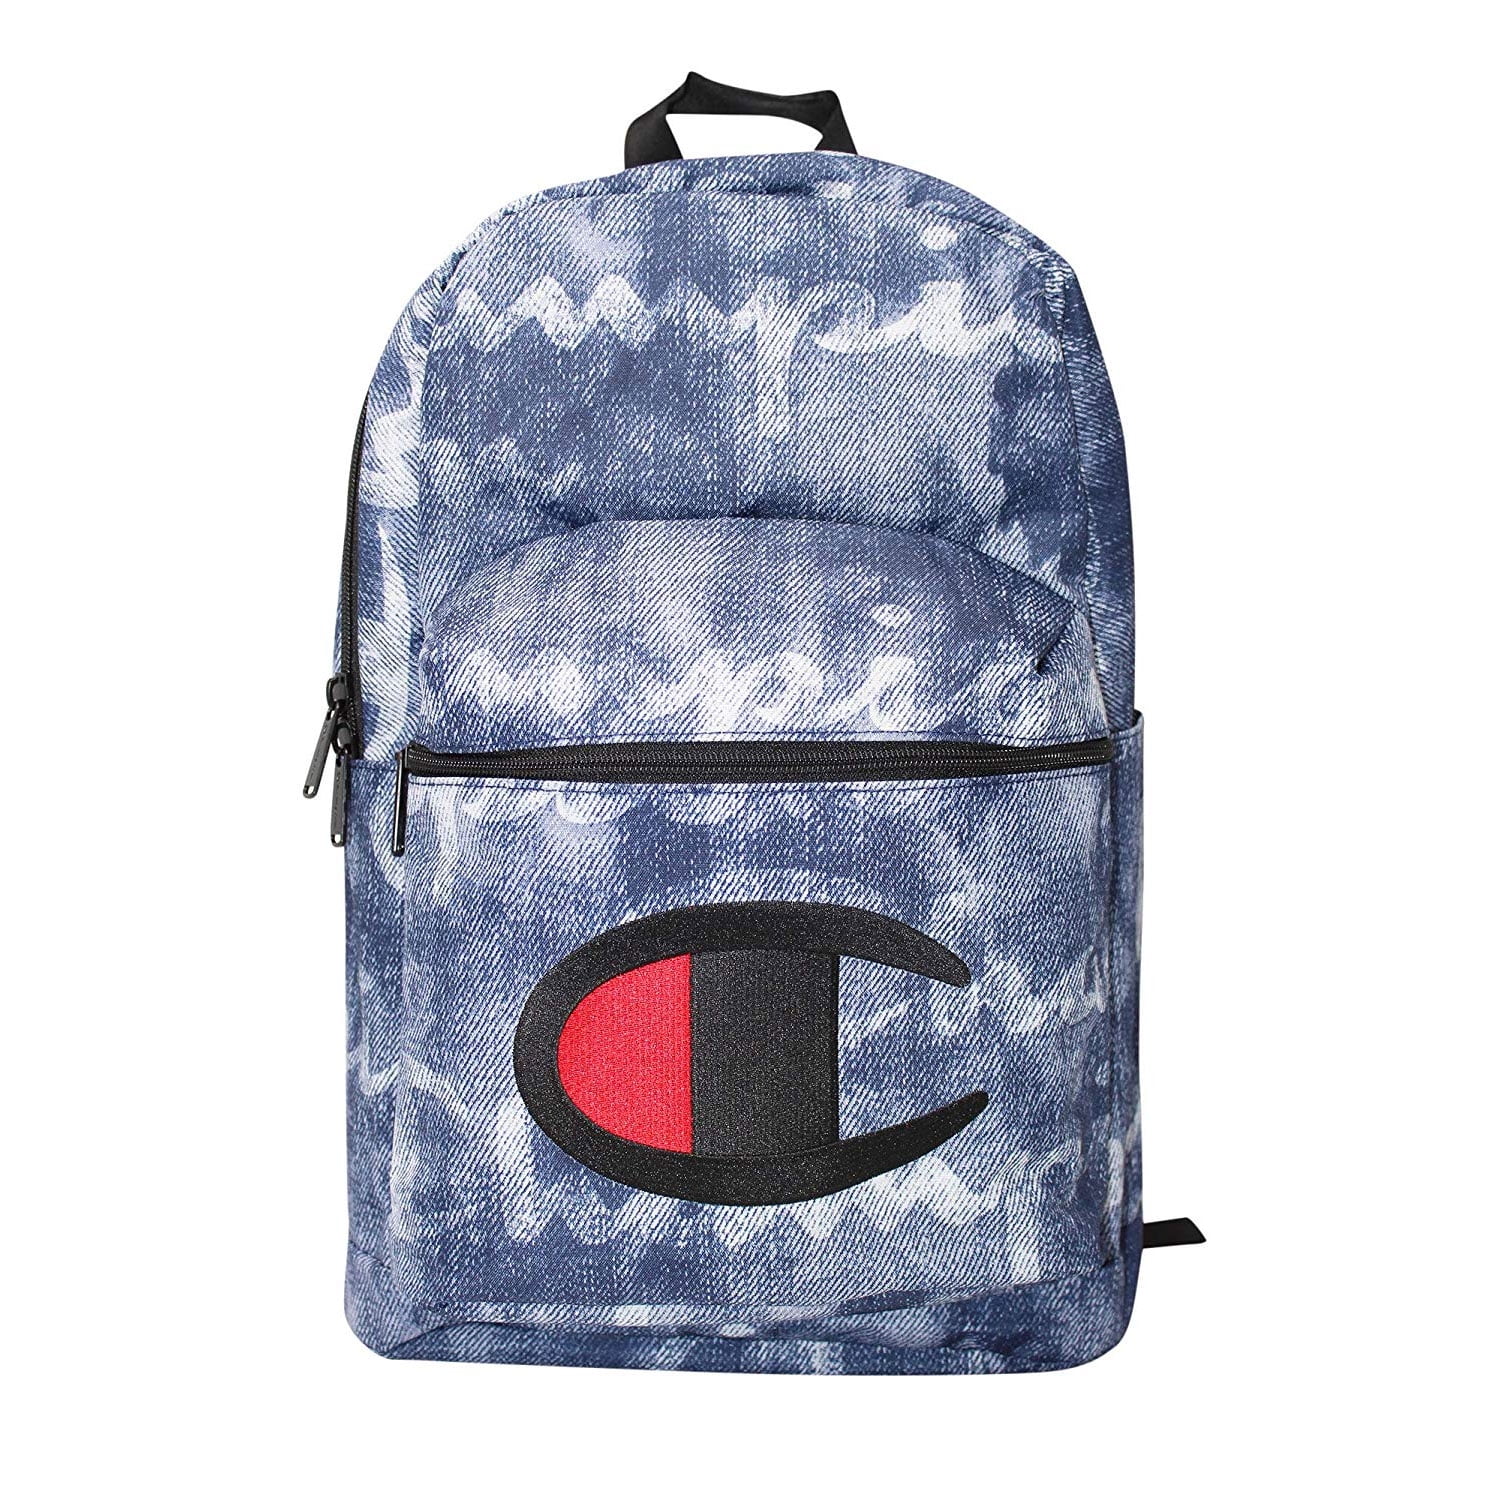 champion navy backpack